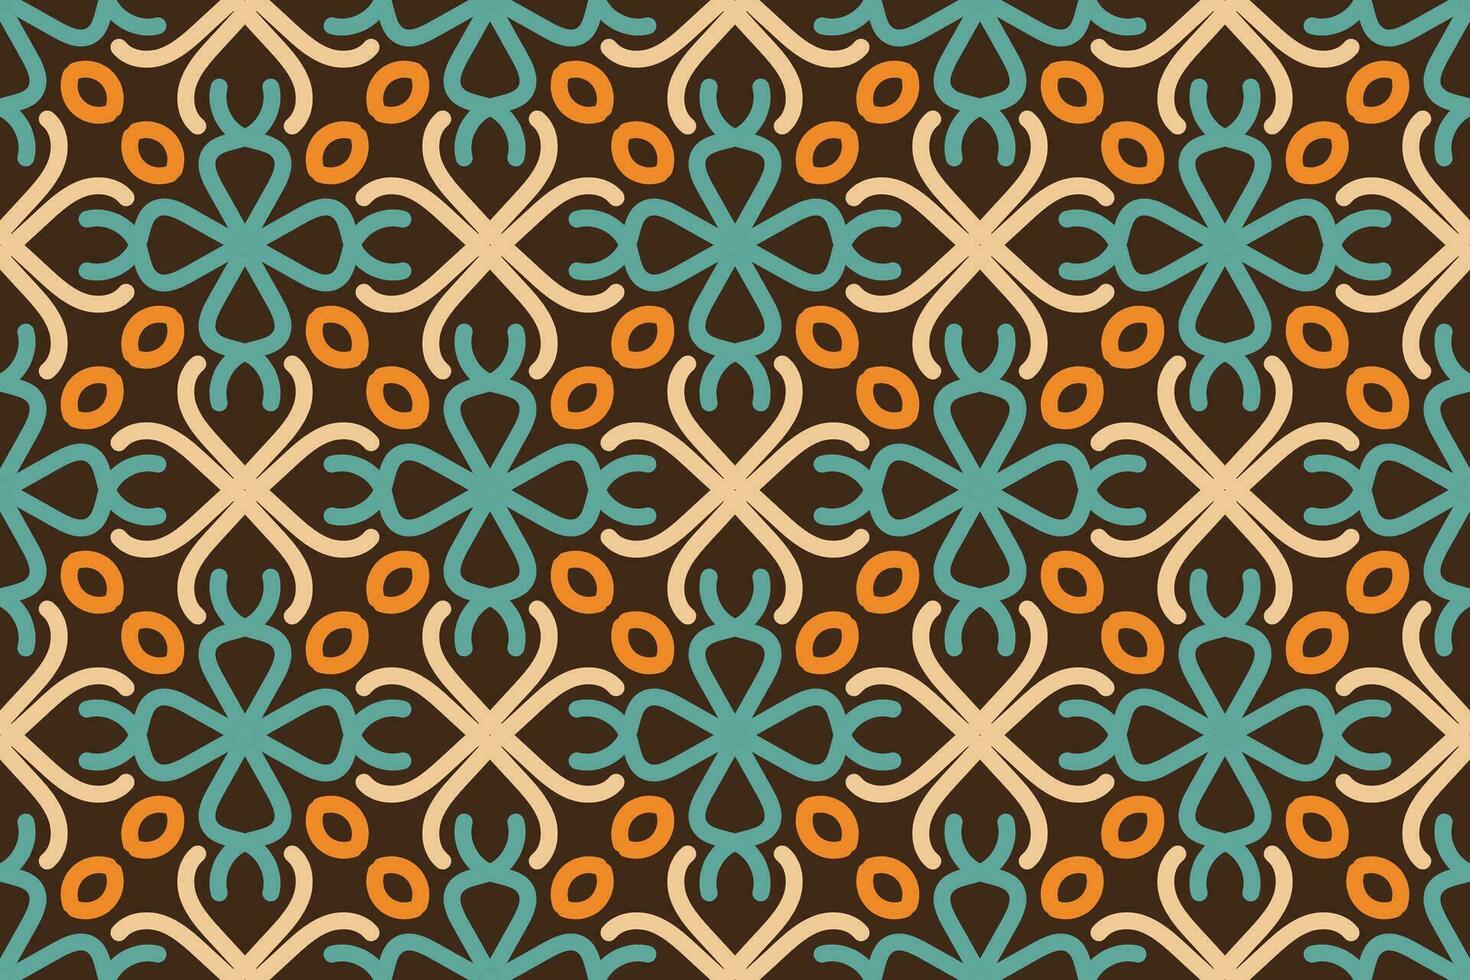 oriental pattern. vintage background with Arabic ornaments. Patterns, backgrounds and wallpapers for your design. Textile ornament. Vector illustration.